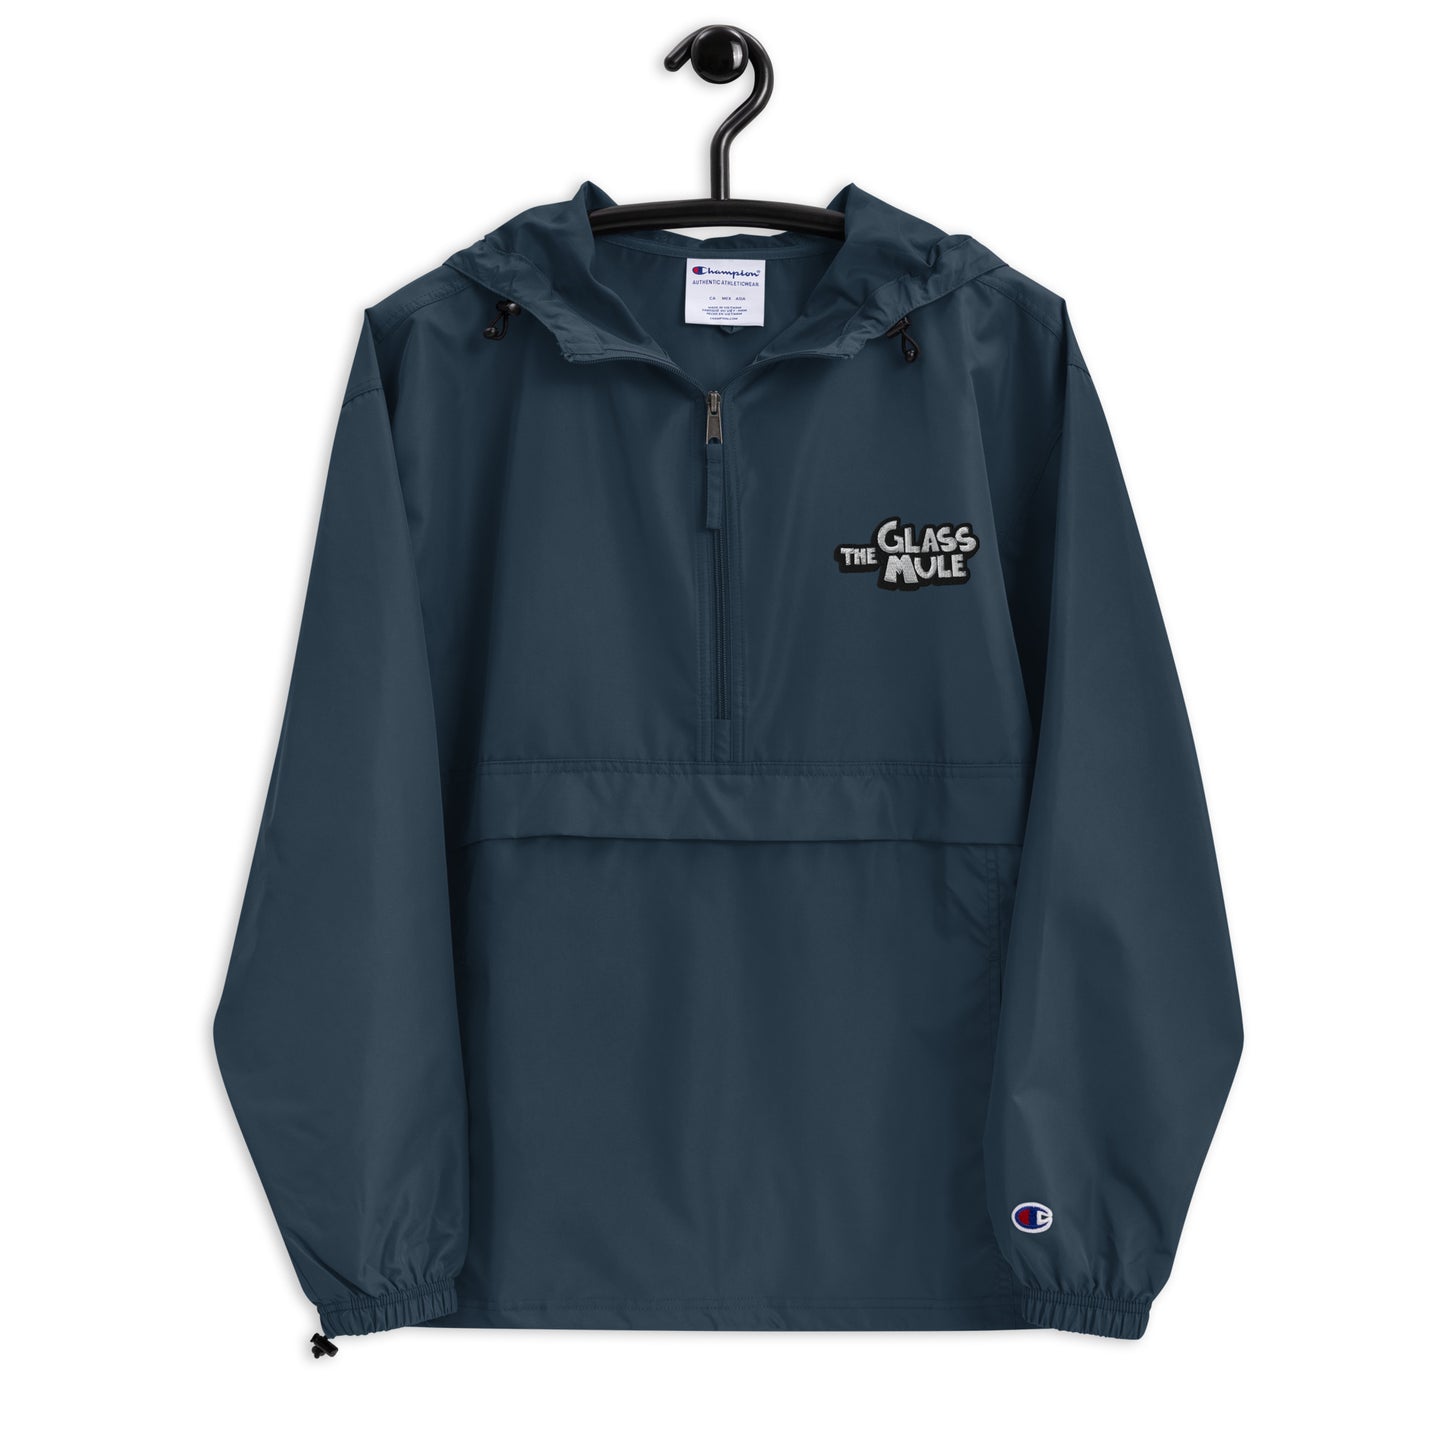 The Glass Mule Embroidered Champion Packable Jacket